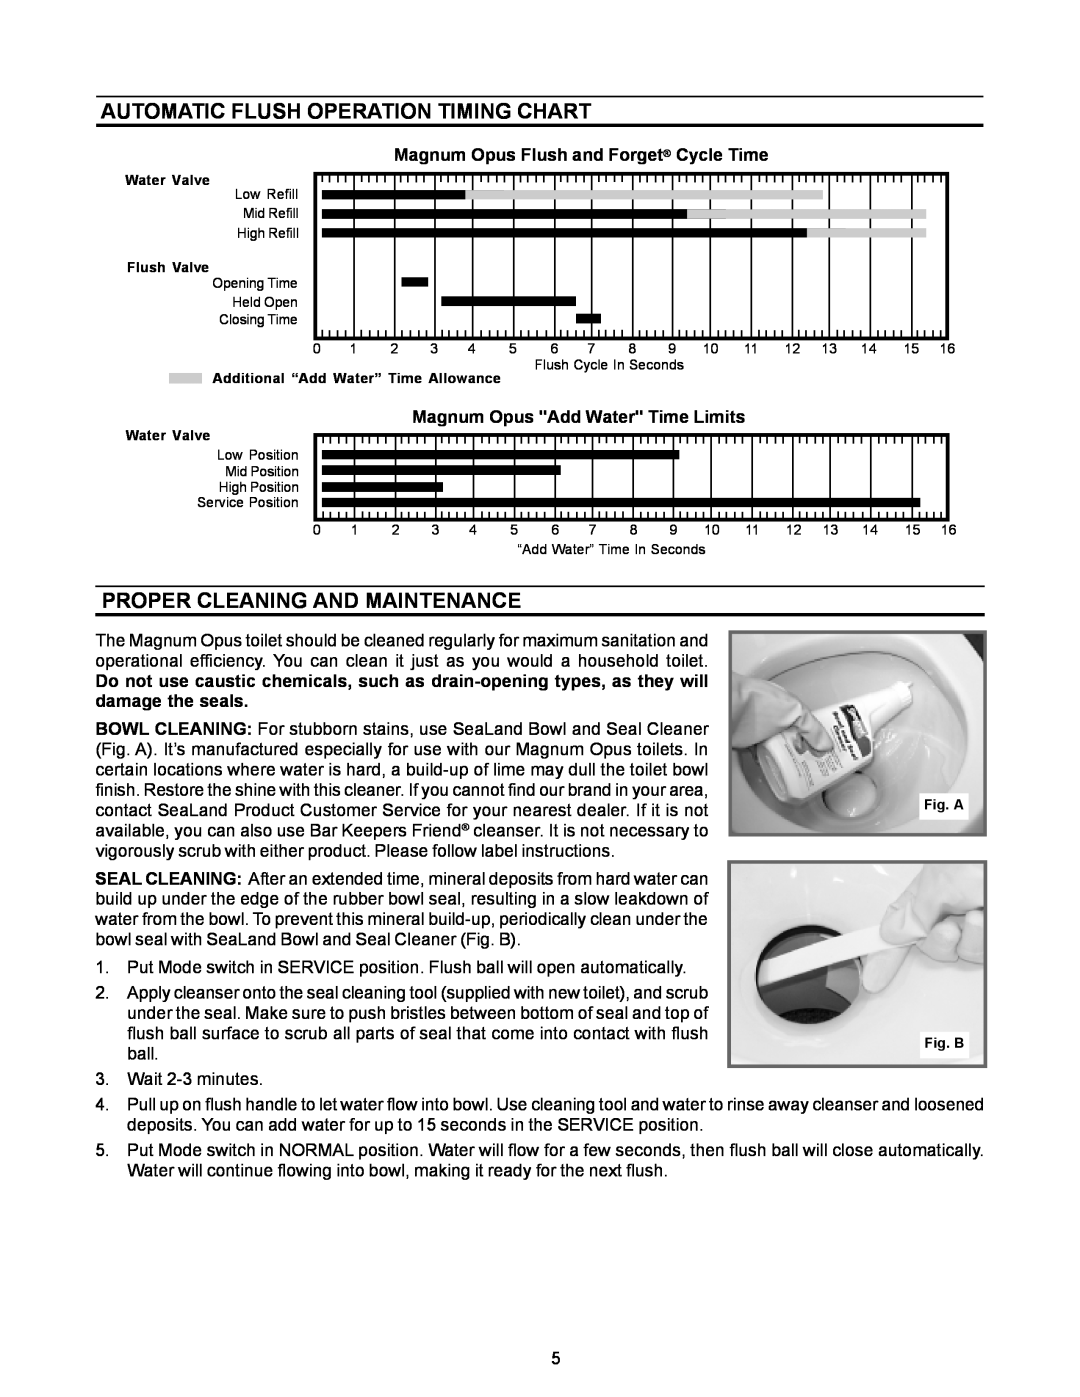 Dometic 3000 Series owner manual Automatic Flush Operation Timing Chart, Proper Cleaning And Maintenance 